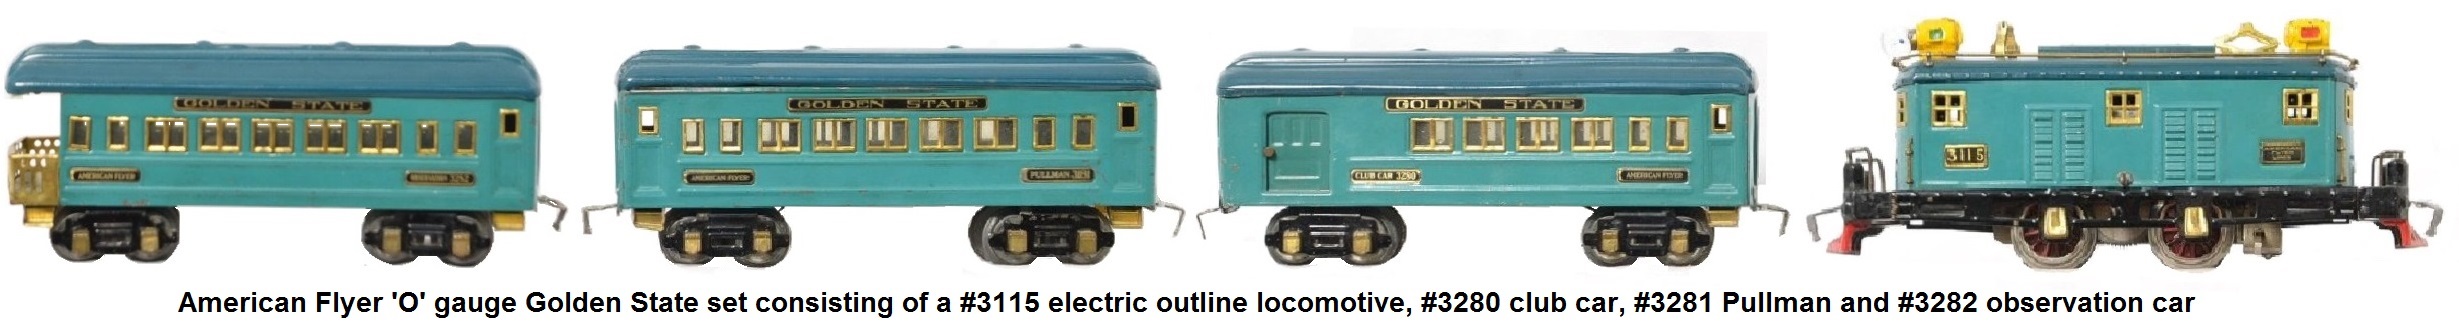 American Flyer 'O' gauge prewar Golden State set consisting of a #3115 electric locomotive, #3280 club, #3281 Pullman and #3282 observation cars